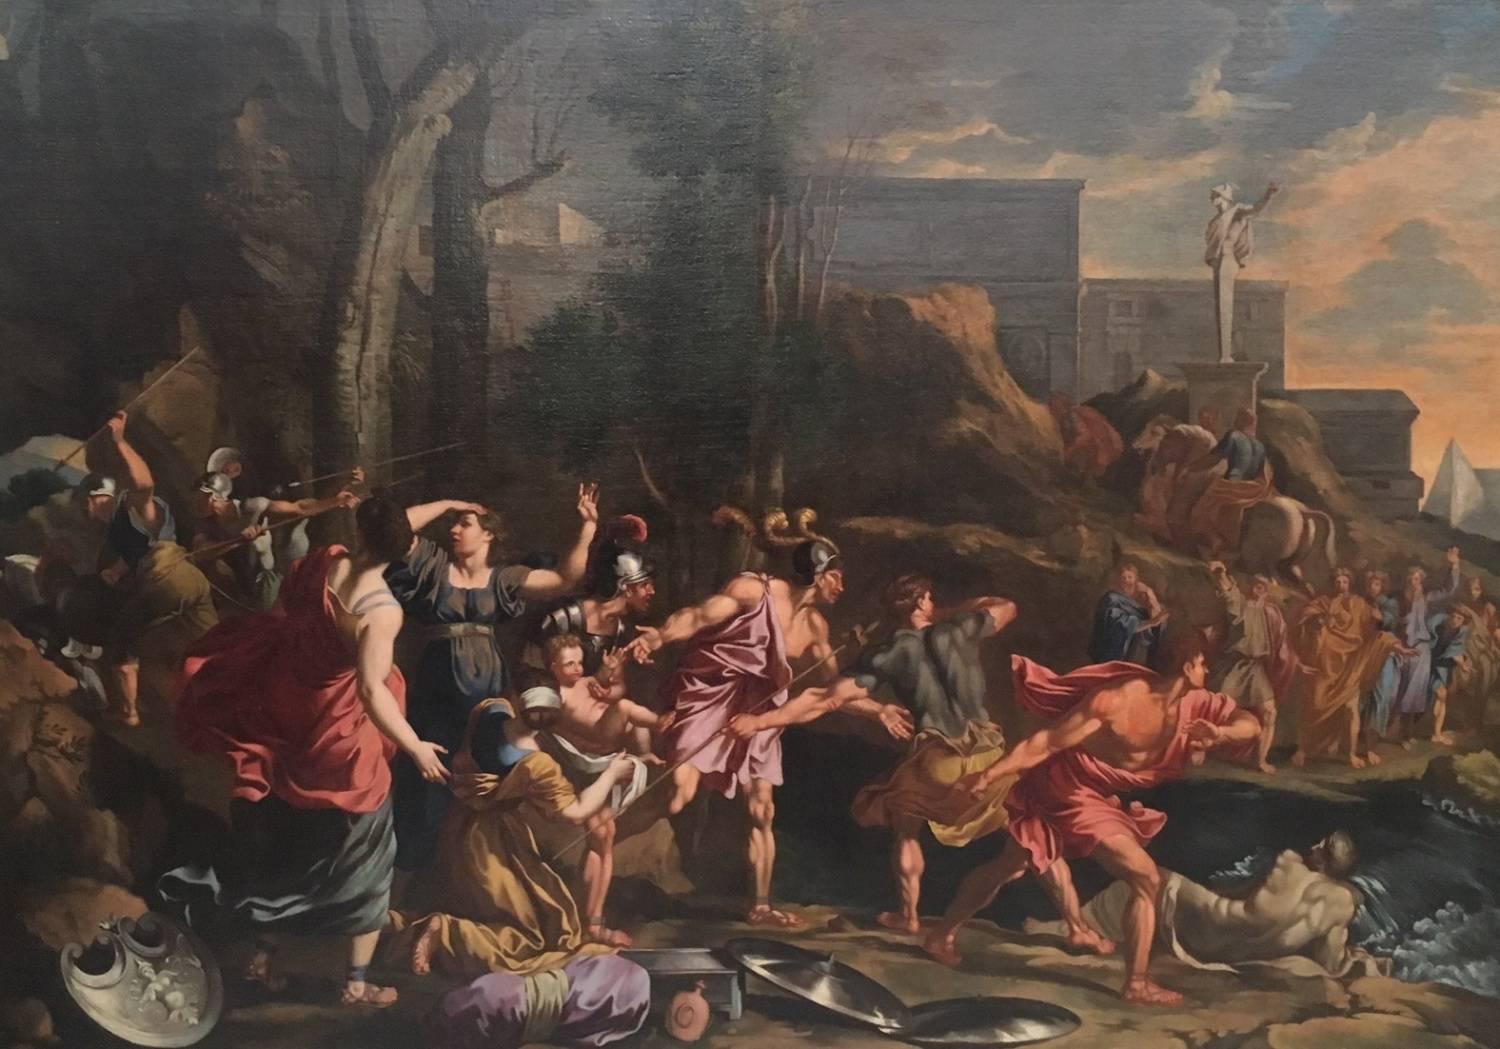 School of "Nicolas Poussin".
Title: Escape from Troy.
Oil painting.
Author: Unknown (Rome).
Age: 17th century (circa 1660-1690).
Measures: 210 x 155 cm.

The golden frame is not old.